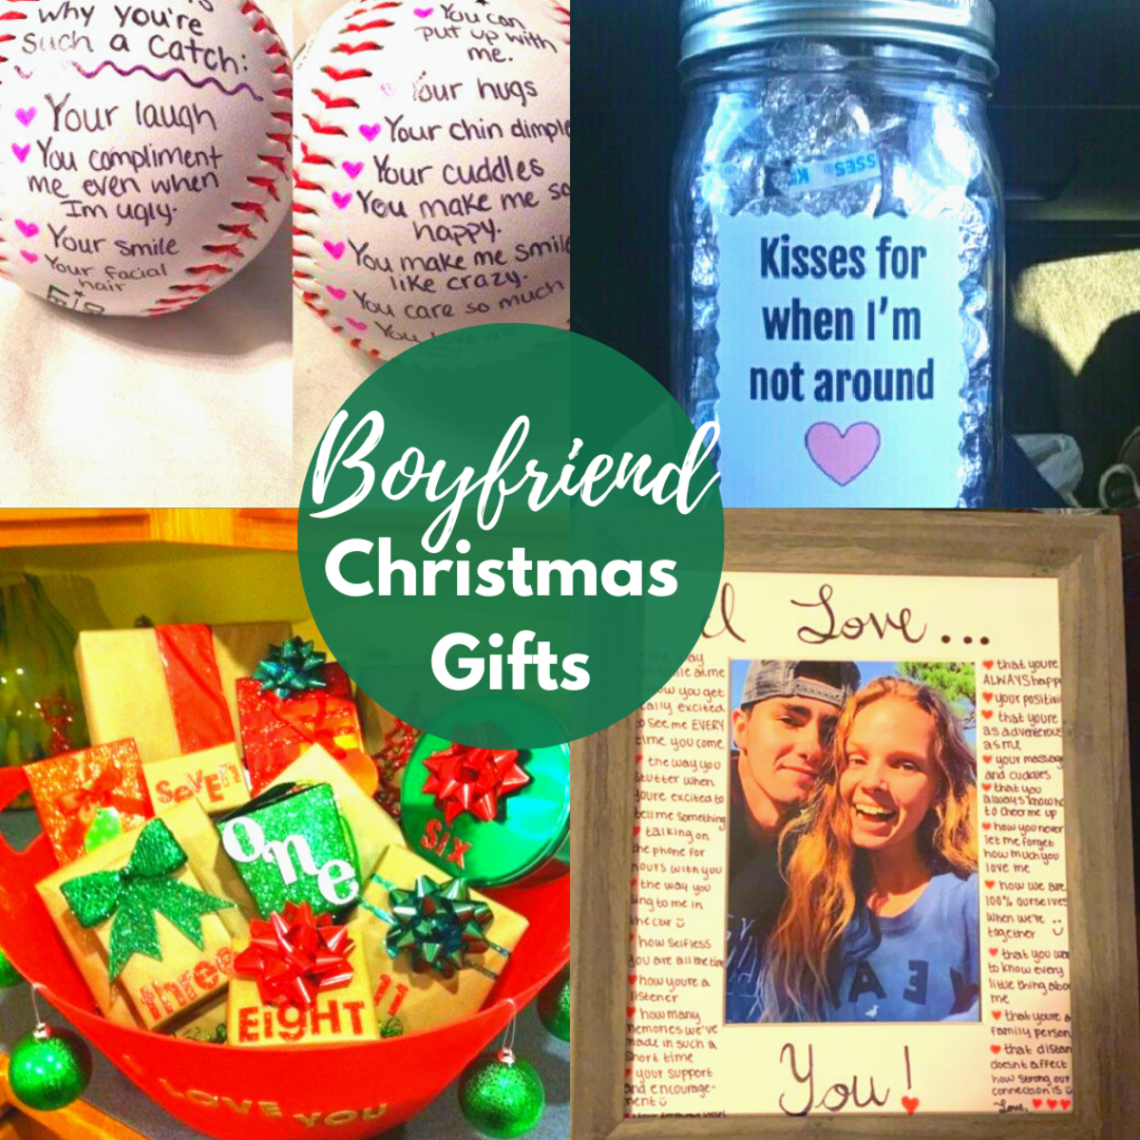 + DIY Christmas Gift Ideas for Boyfriend to Light His Day - HubPages